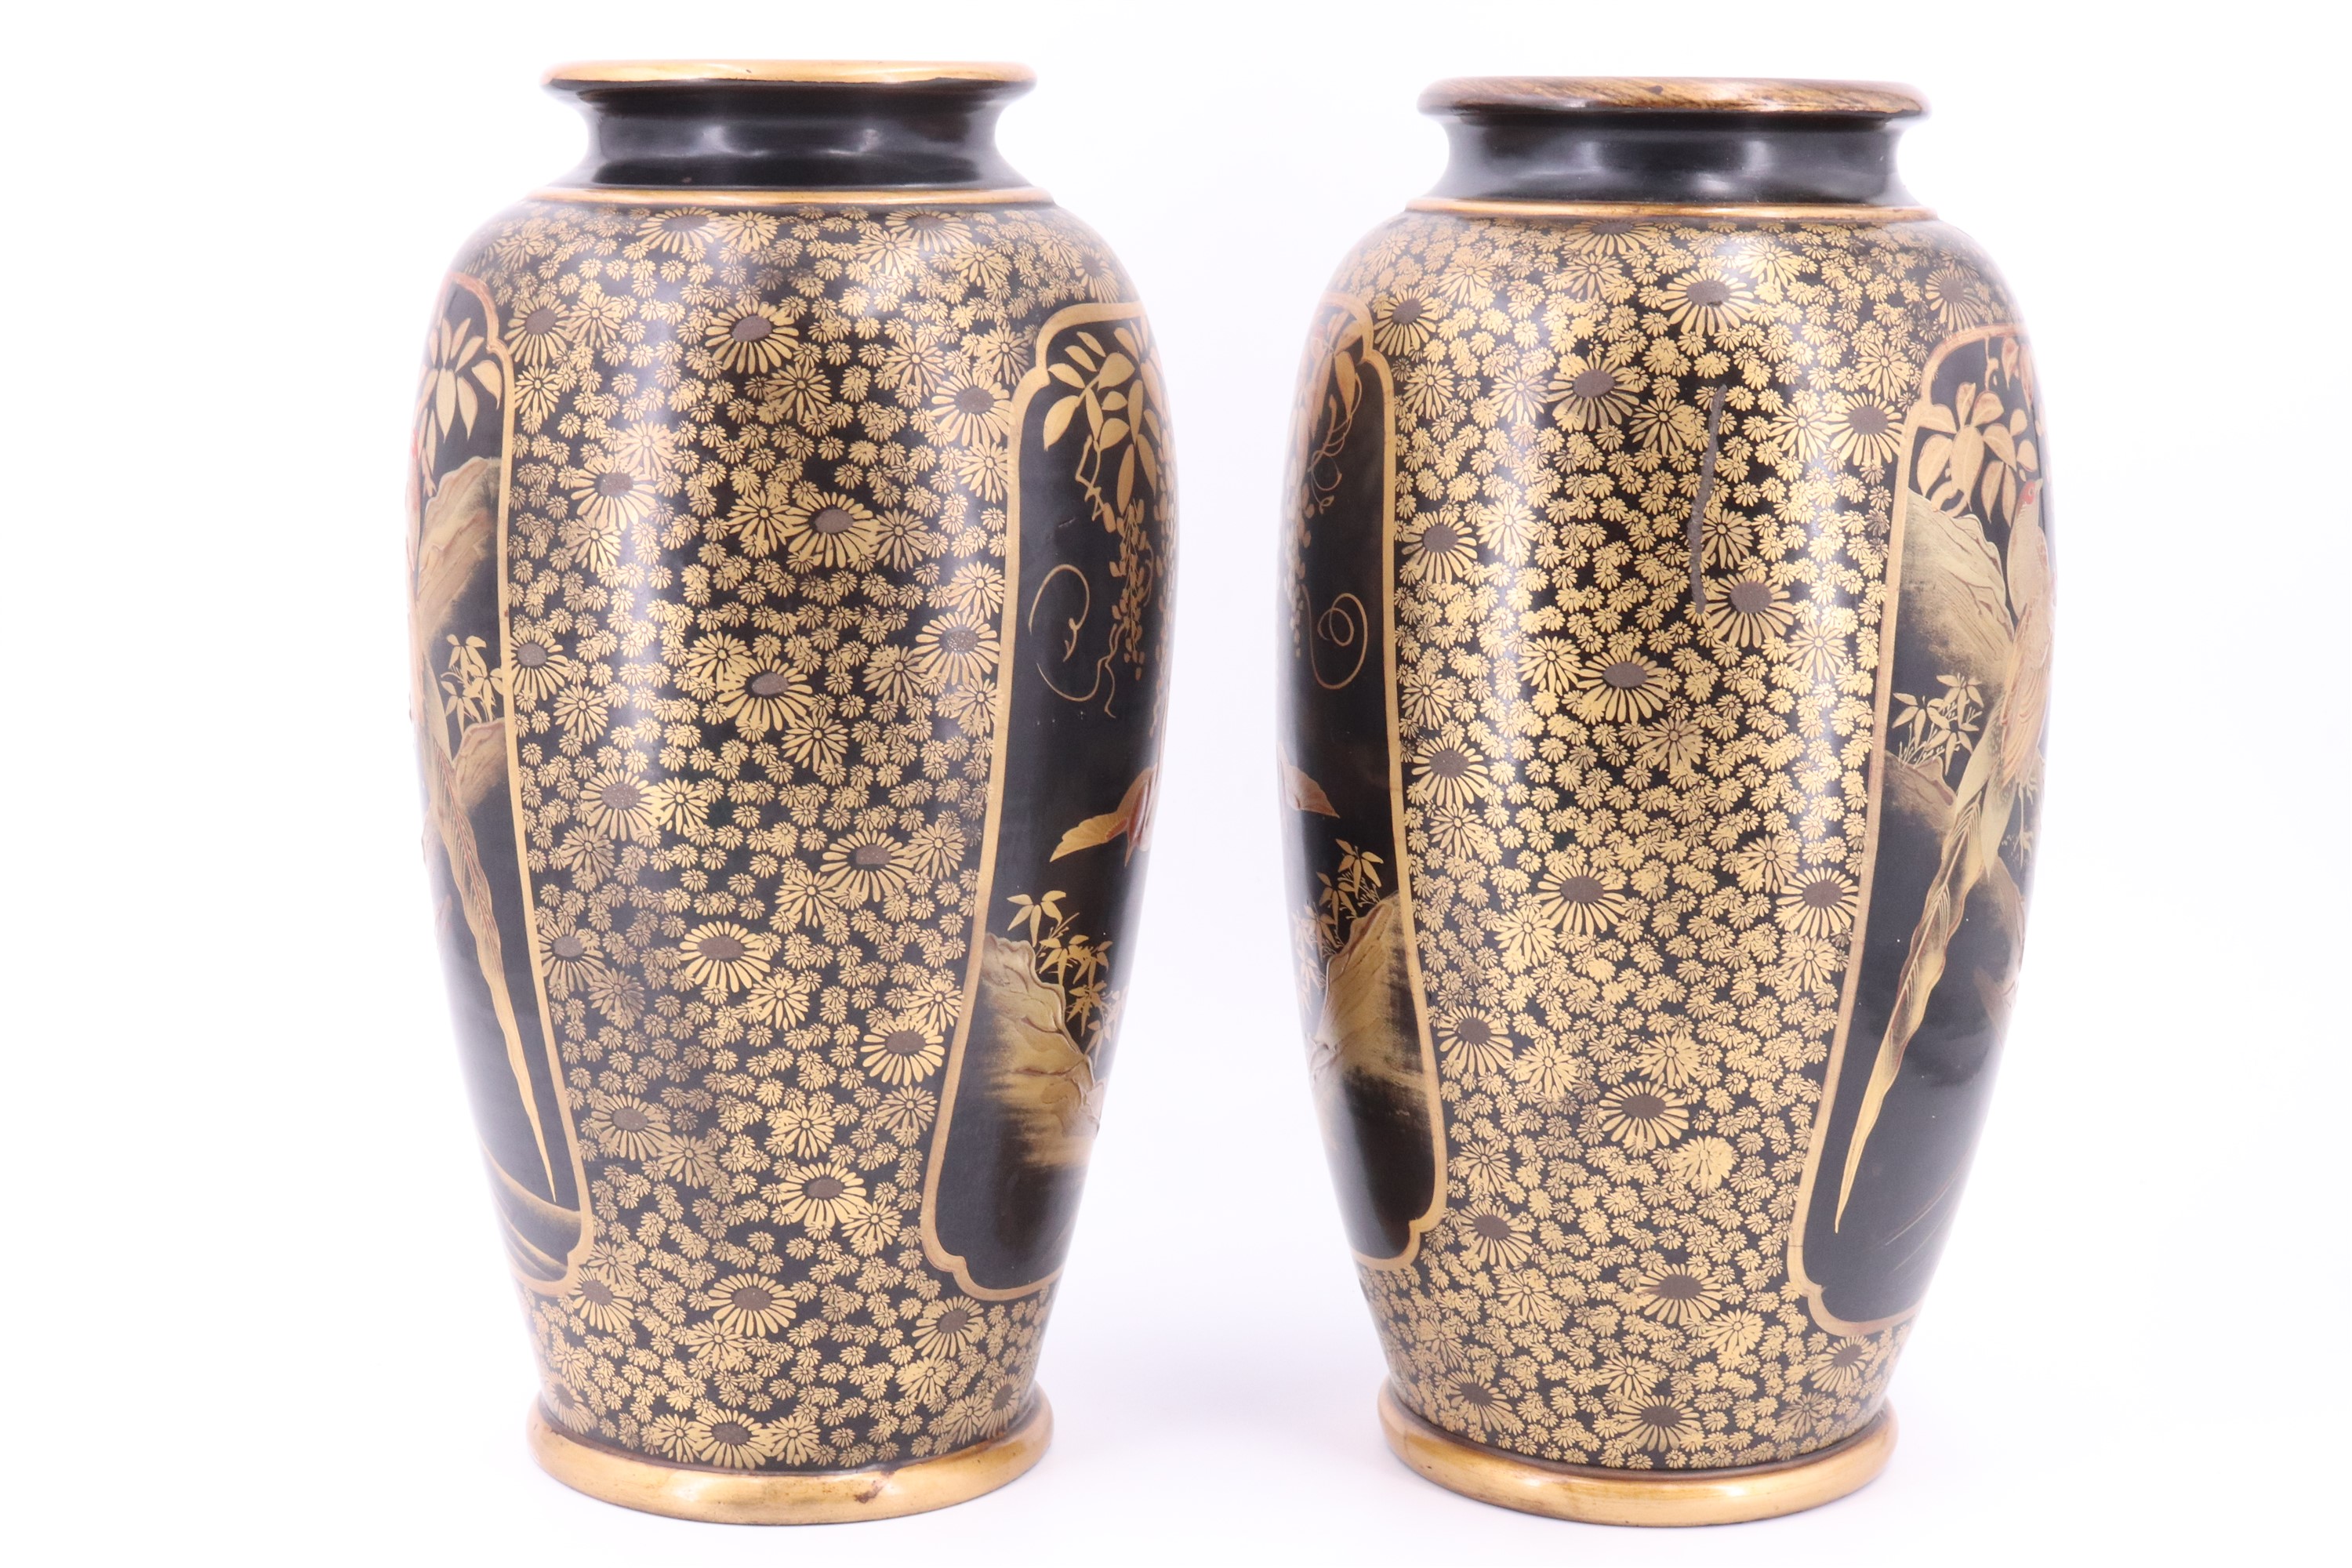 A pair of late Meiji / Taisho Japanese oviform vases, raised-gilt decorated in depiction of birds - Image 2 of 6